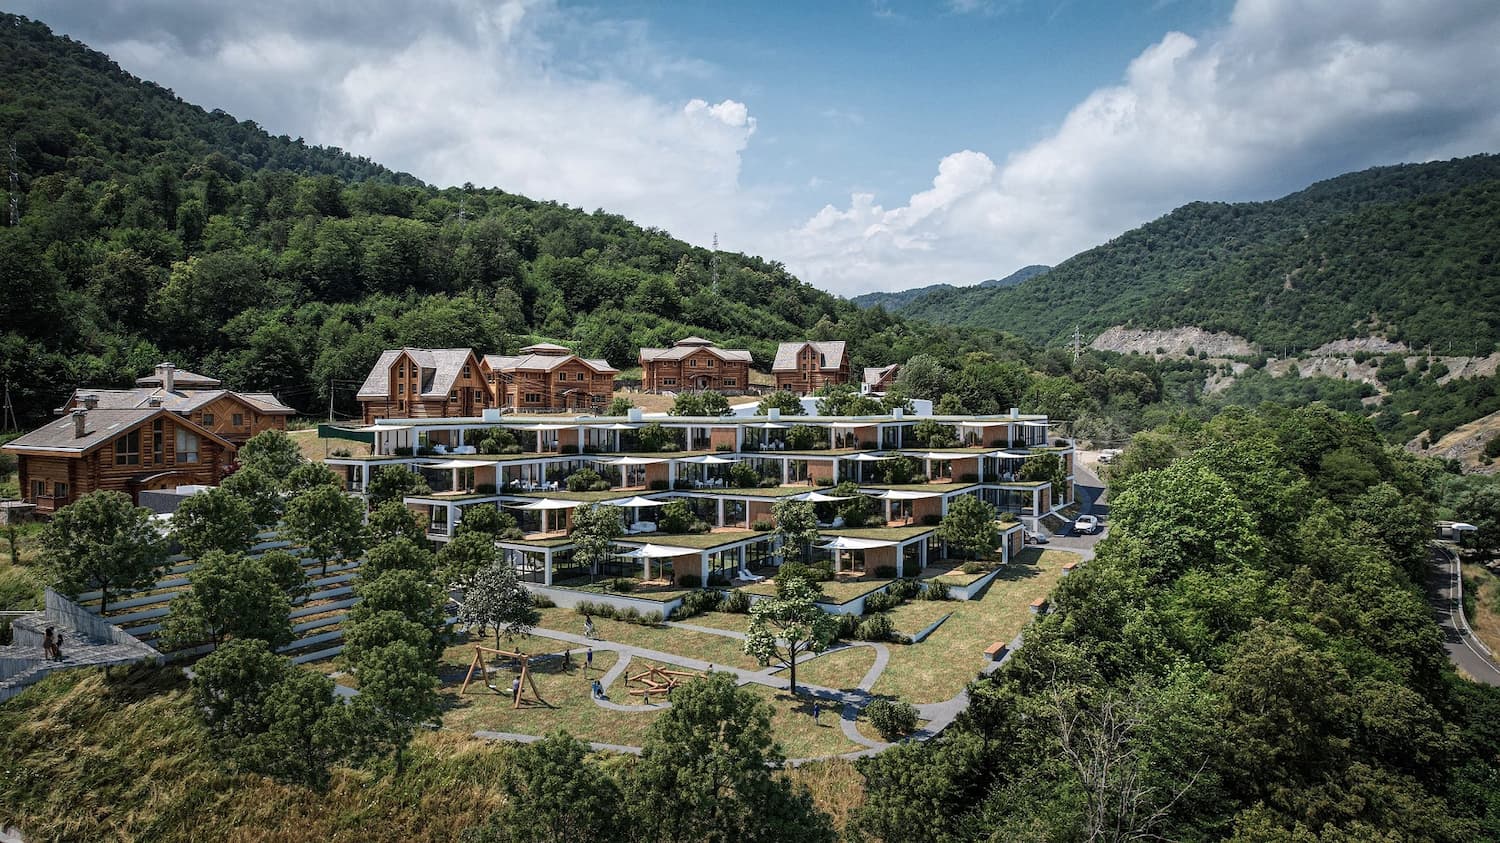 The first gated town Mountain Village is being built in Armenia